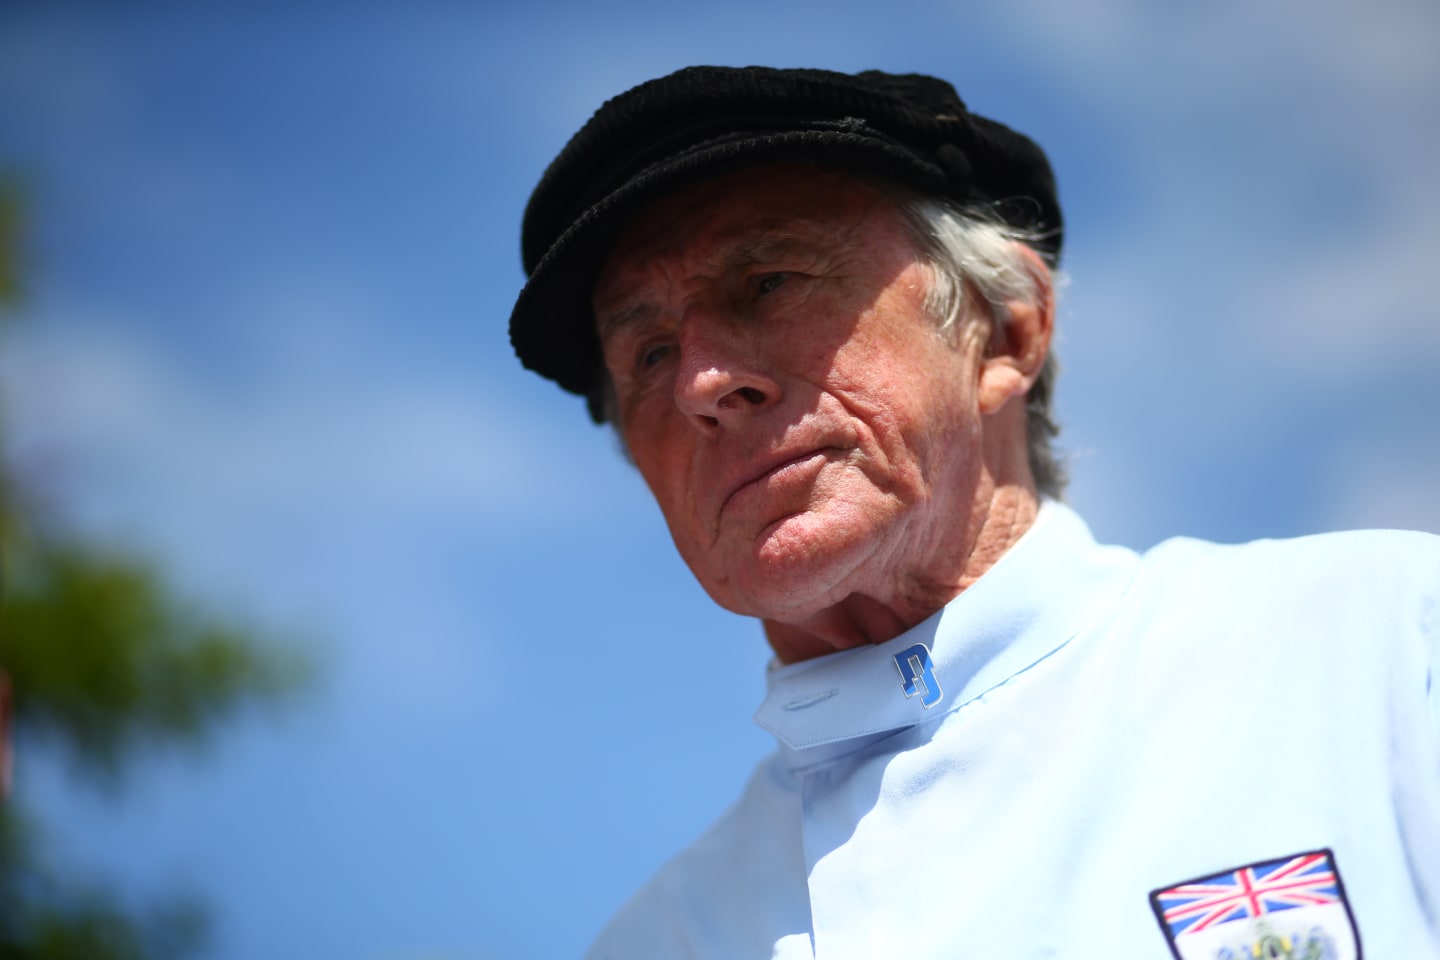 www.sutton-images.com Jackie Stewart (GBR) at Goodwood Festival of Speed, Goodwood, England, 30 June - 2 July 2017. © Sutton Images